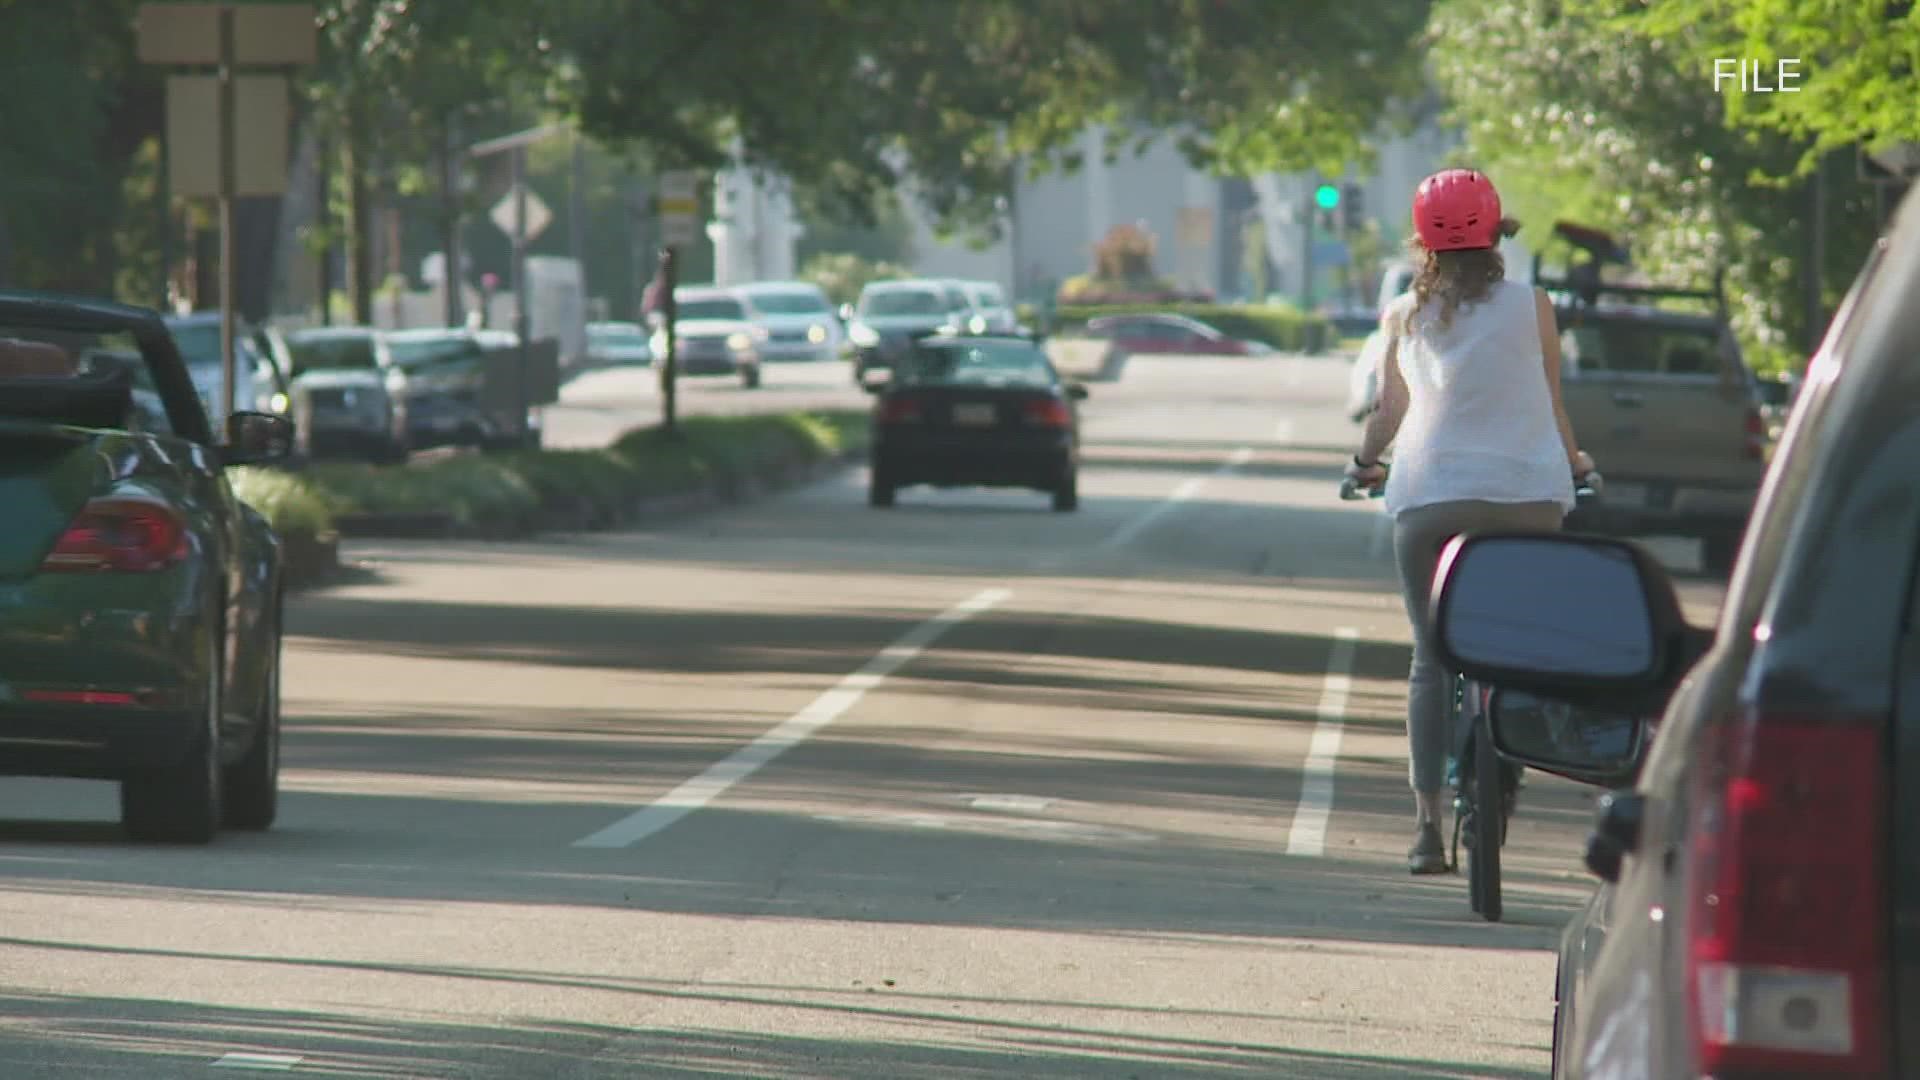 Residents who spoke in front of City Council had several reasons why they want bike lanes gone, and advocates had one clear reason why they should stay.